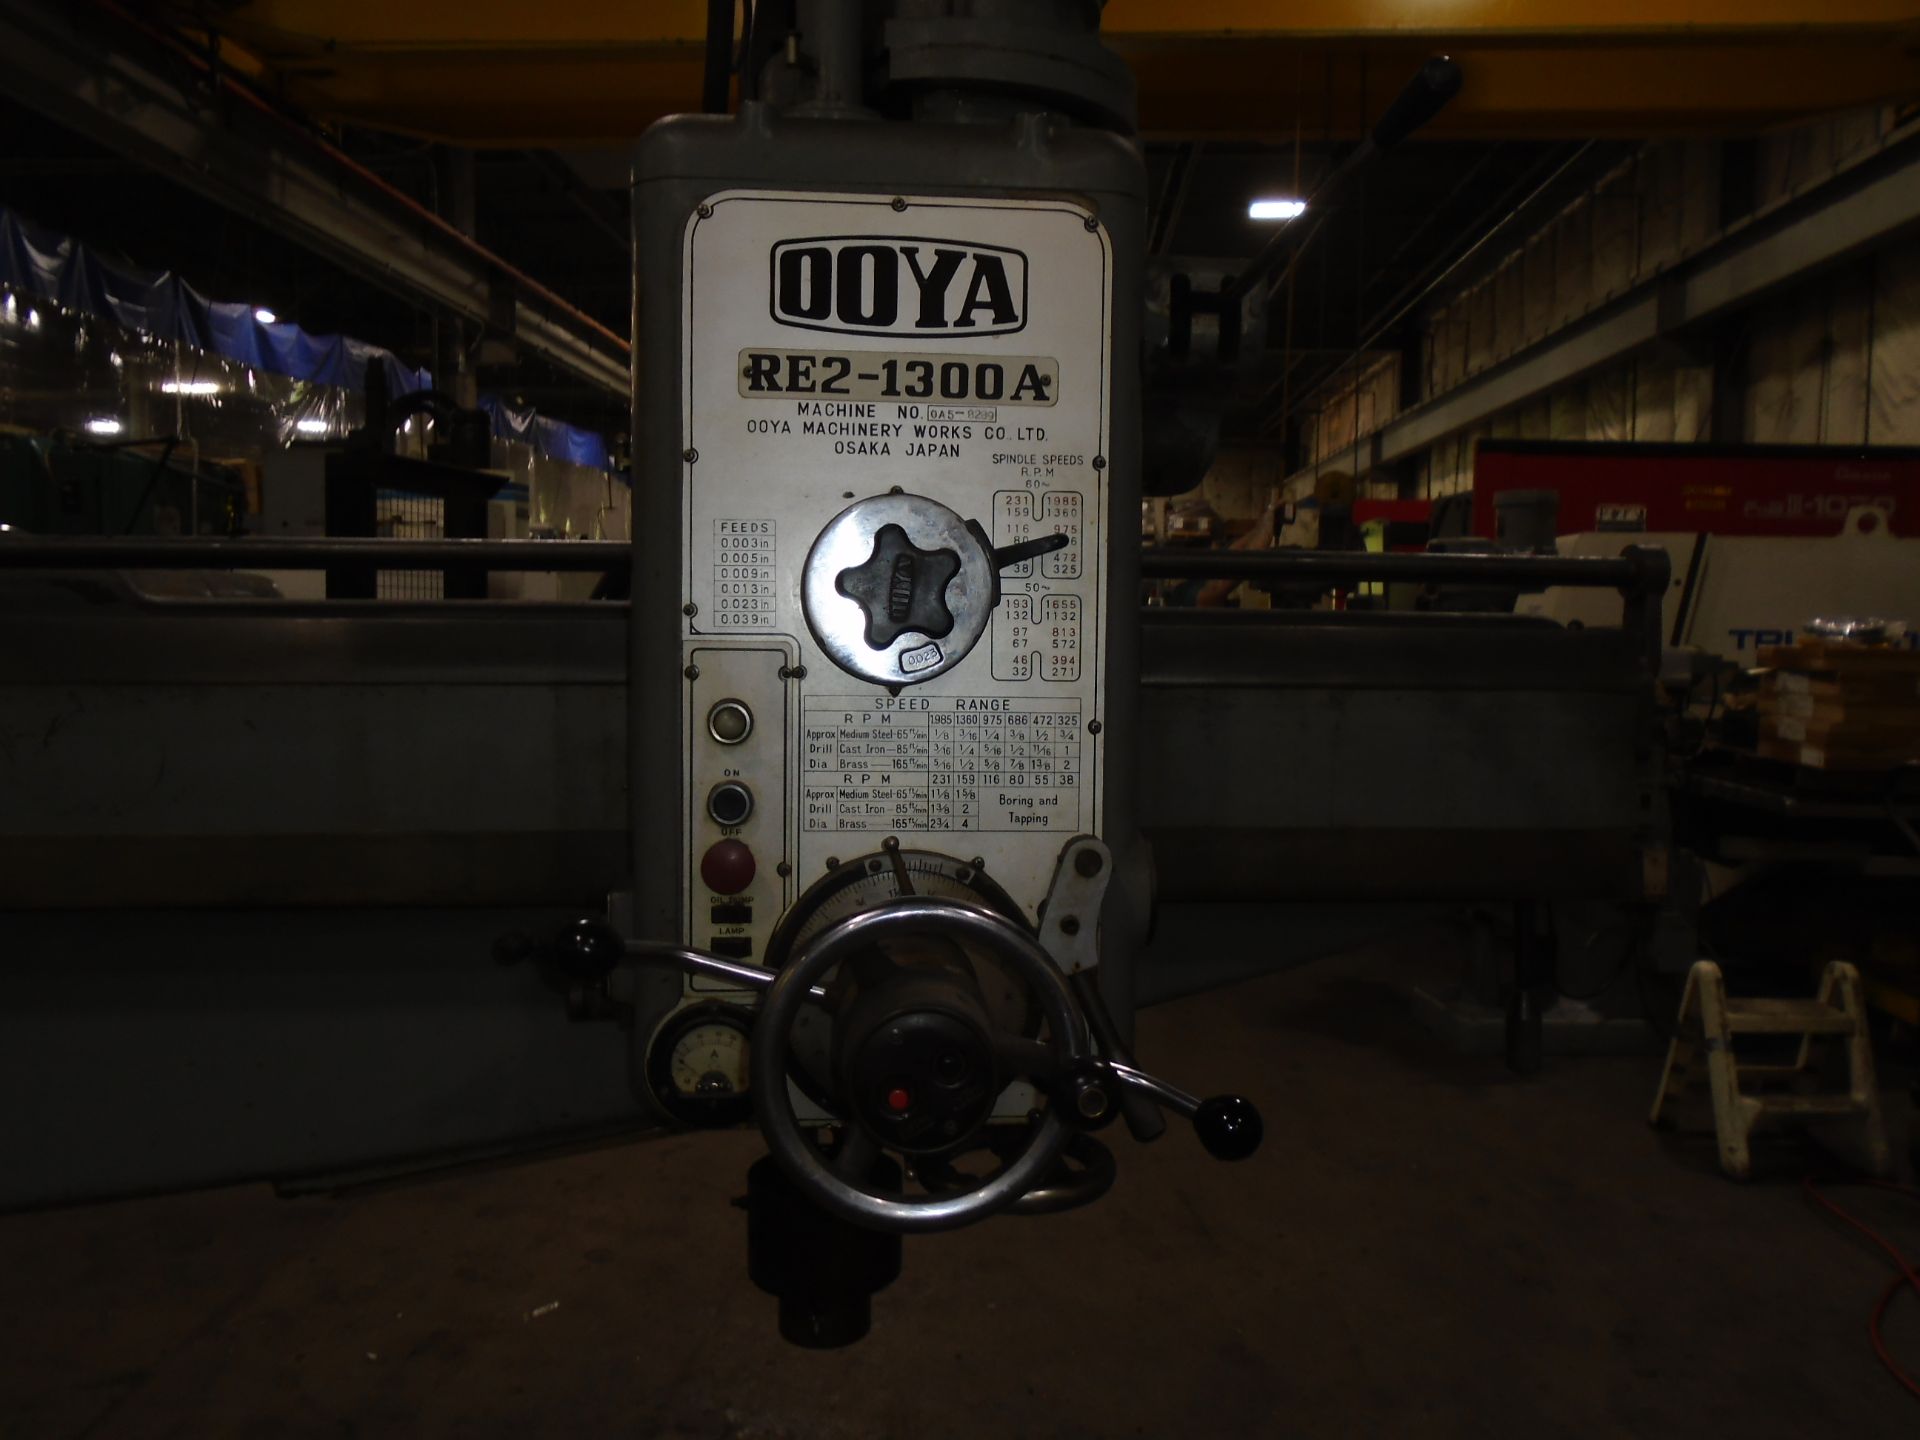 4' x 13" Ooya Radial Arm Drill RE2-1300 - Image 4 of 6